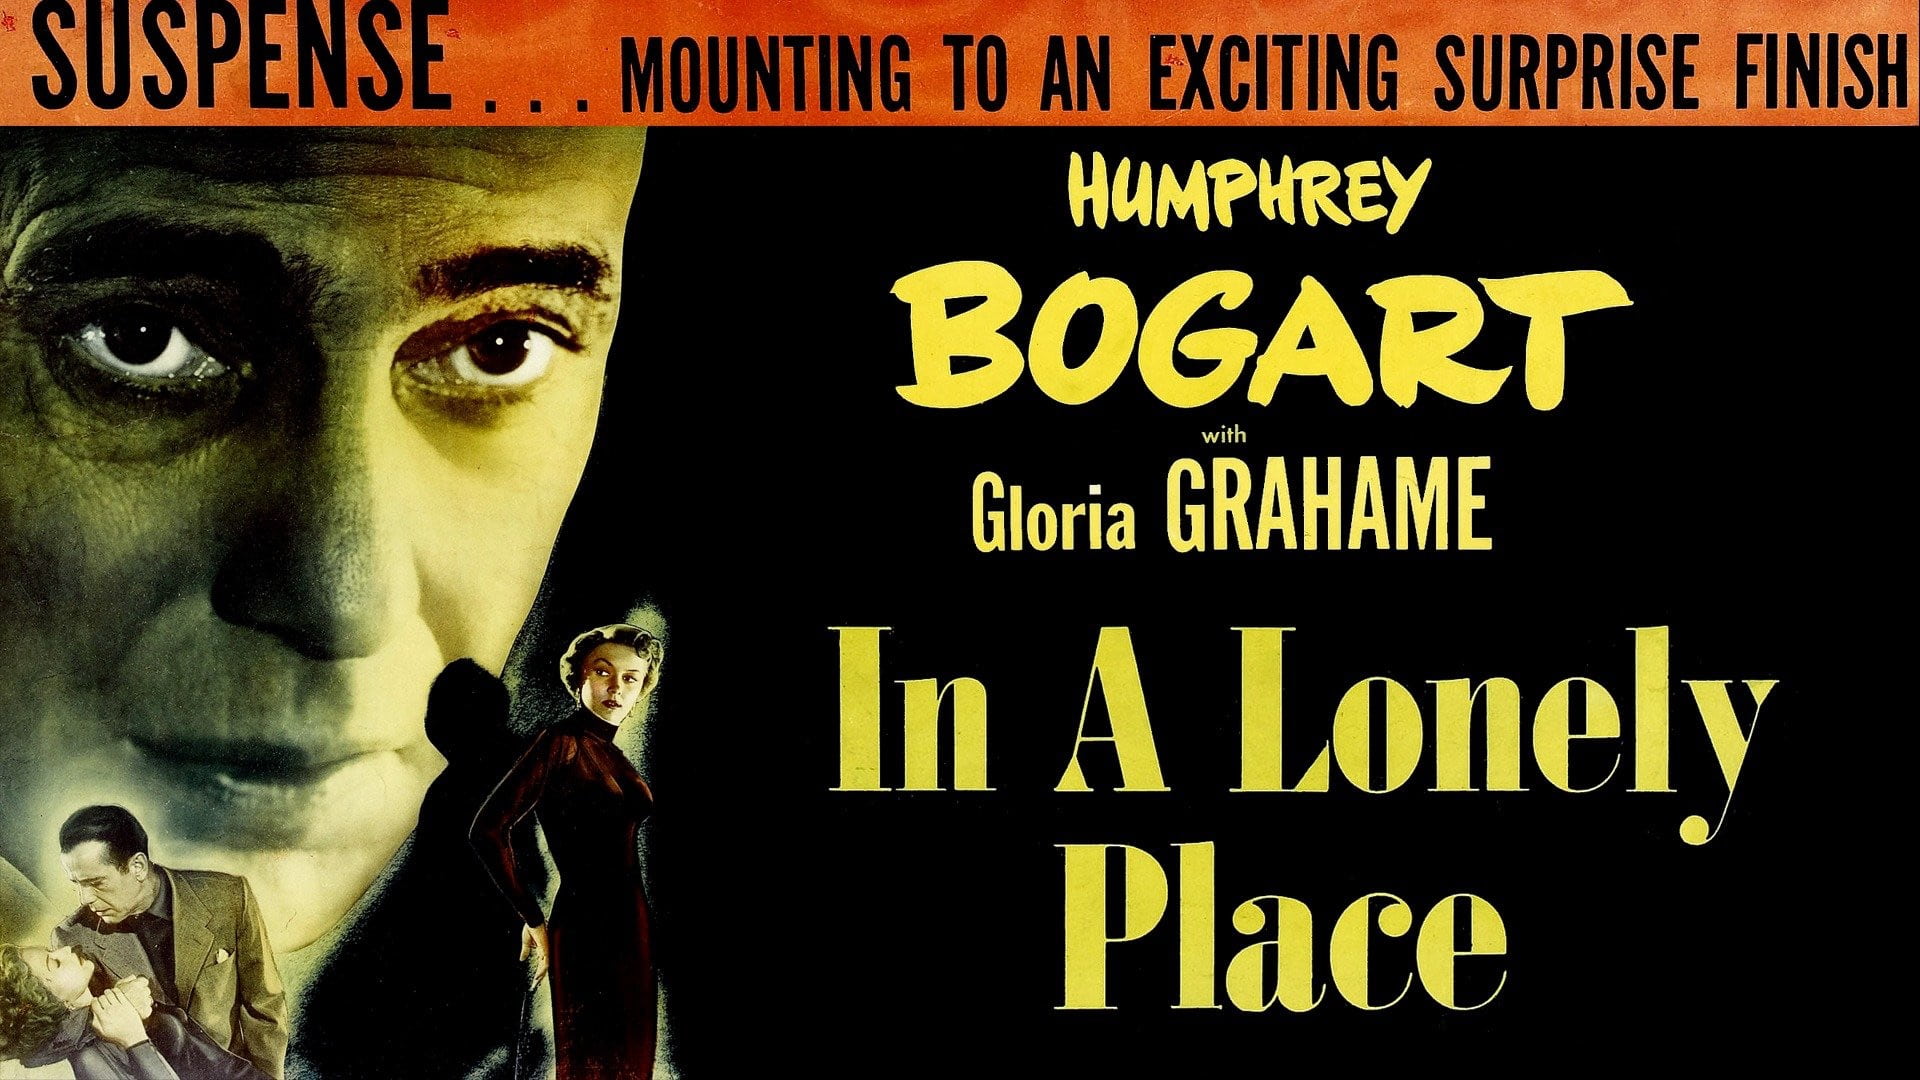 41-facts-about-the-movie-in-a-lonely-place